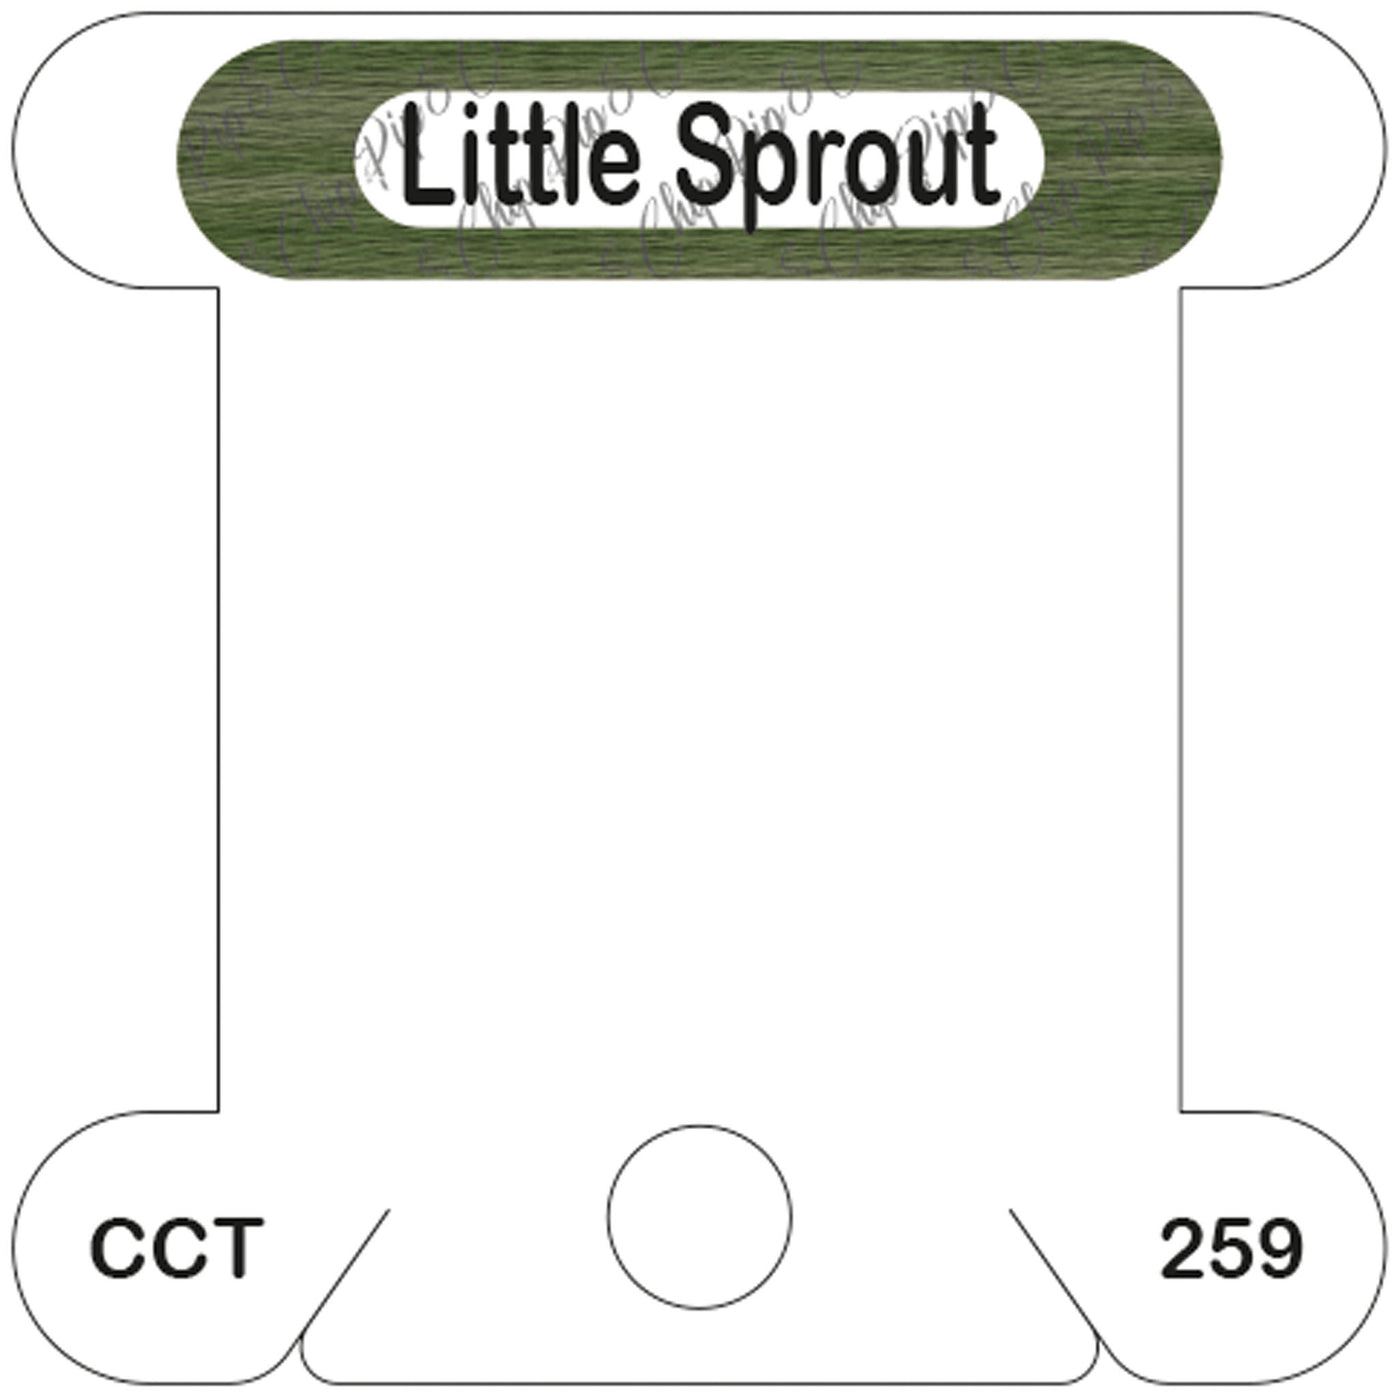 Classic Colorworks Little Sprout acrylic bobbin